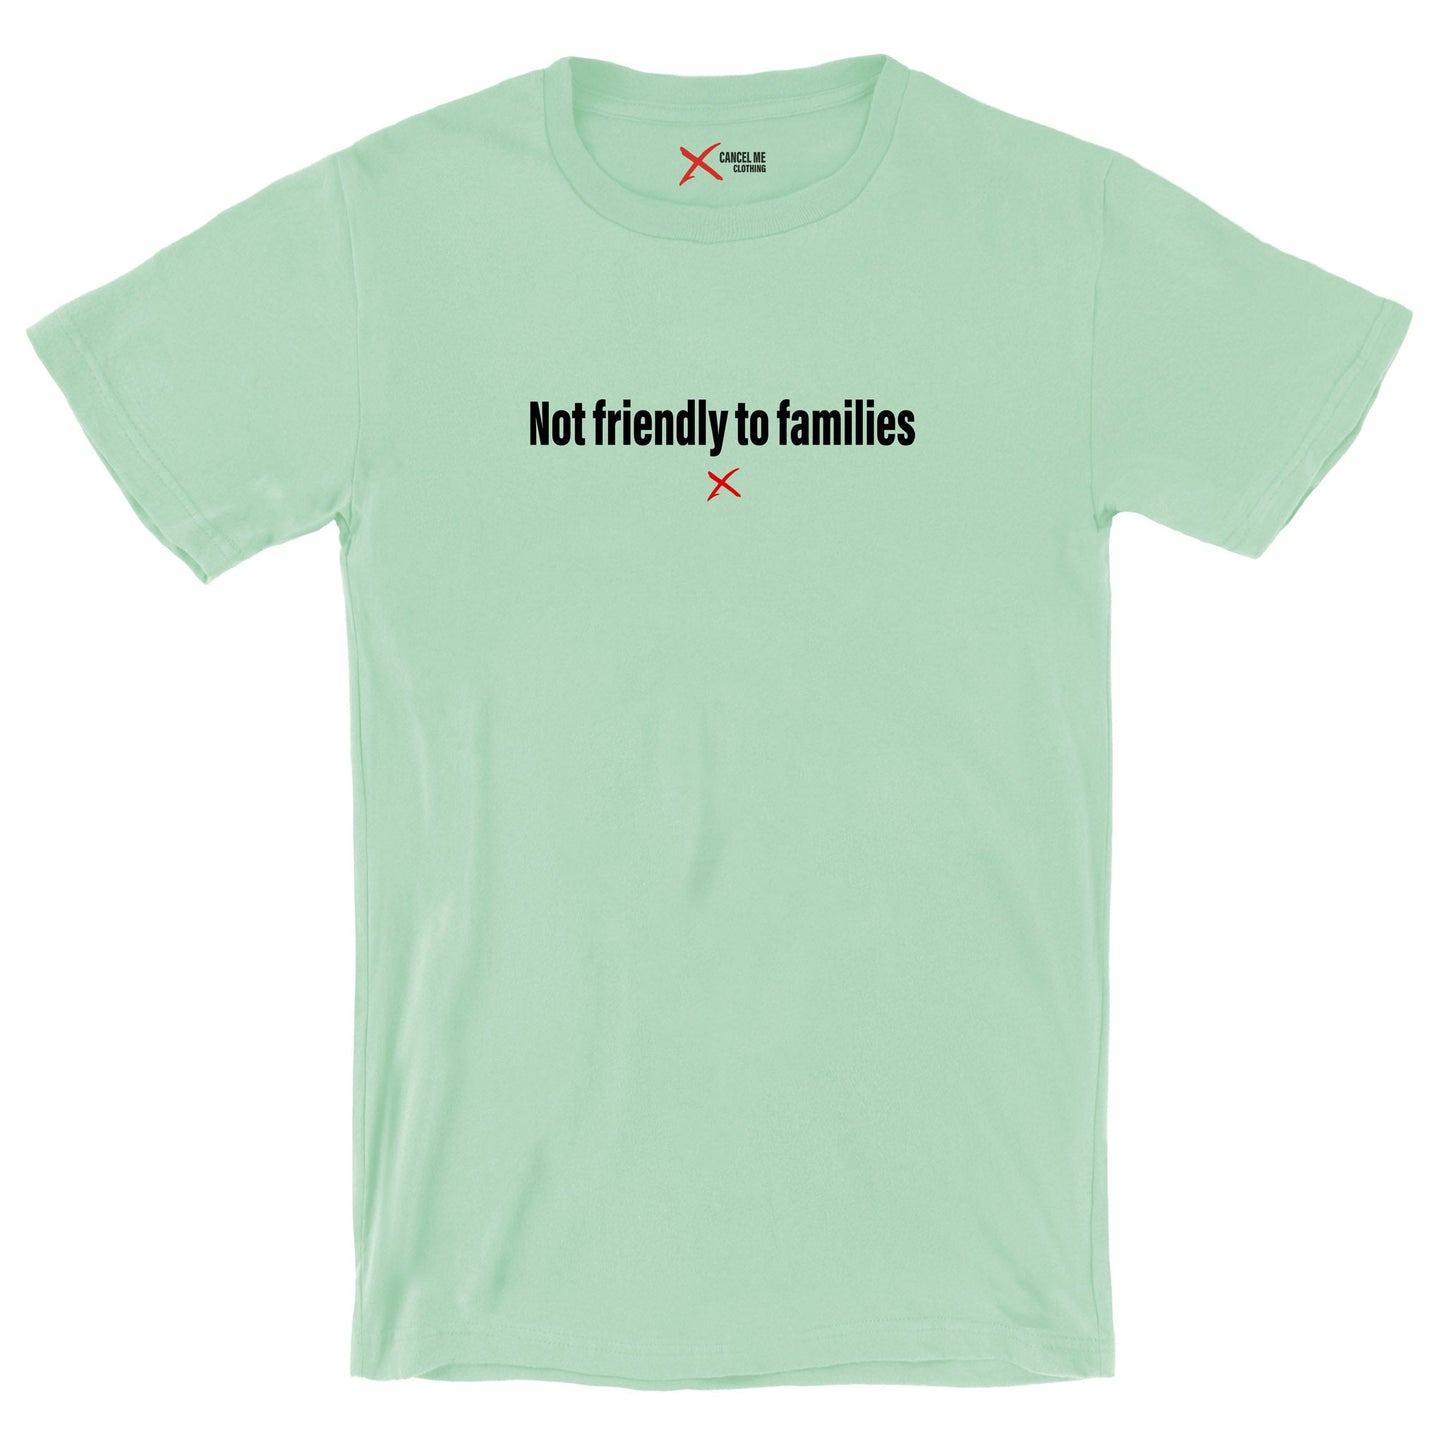 Not friendly to families - Shirt